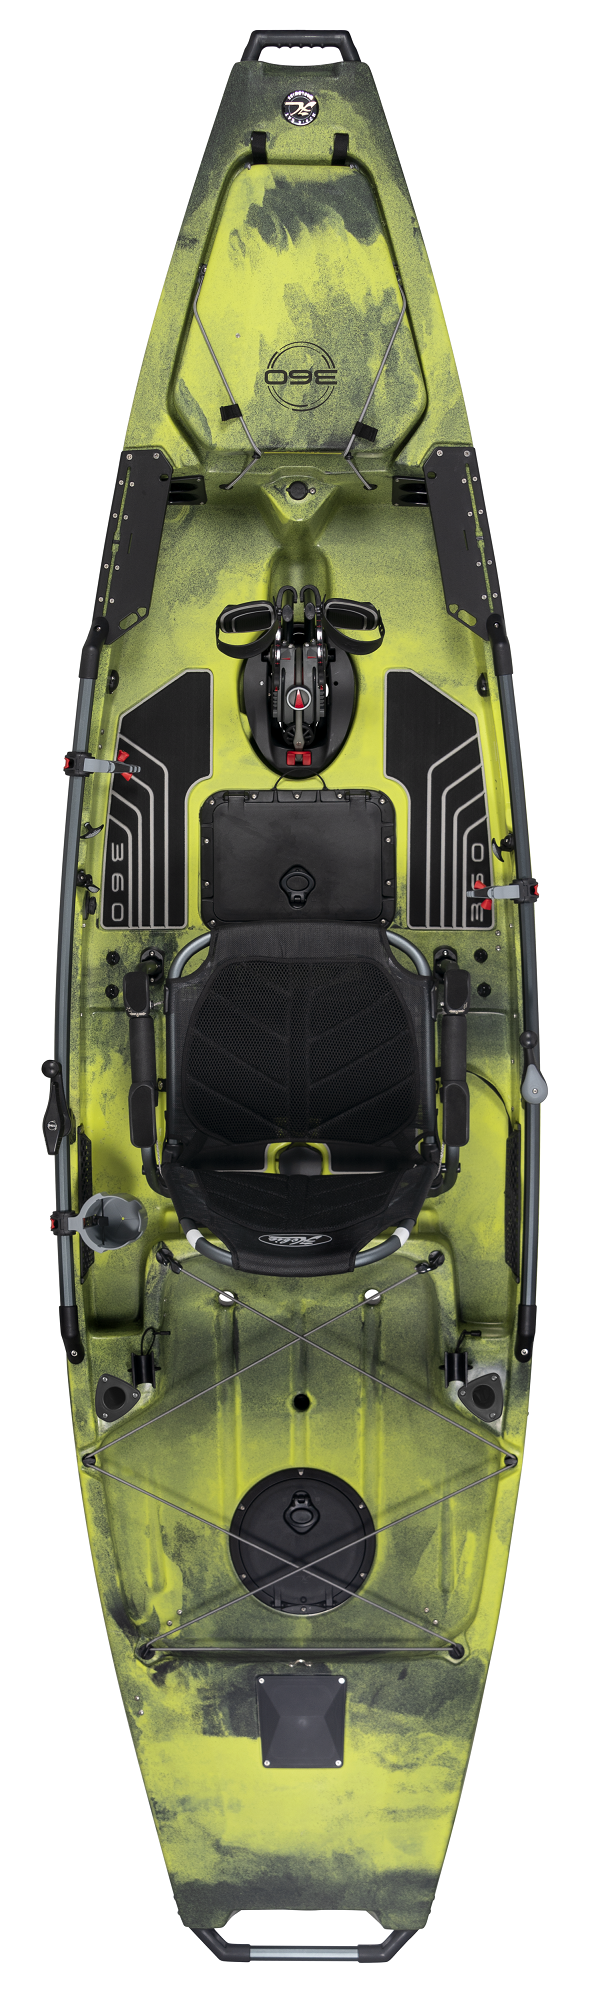 MIRAGE PRO ANGLER 12 WITH 360 DRIVE TECHNOLOGY